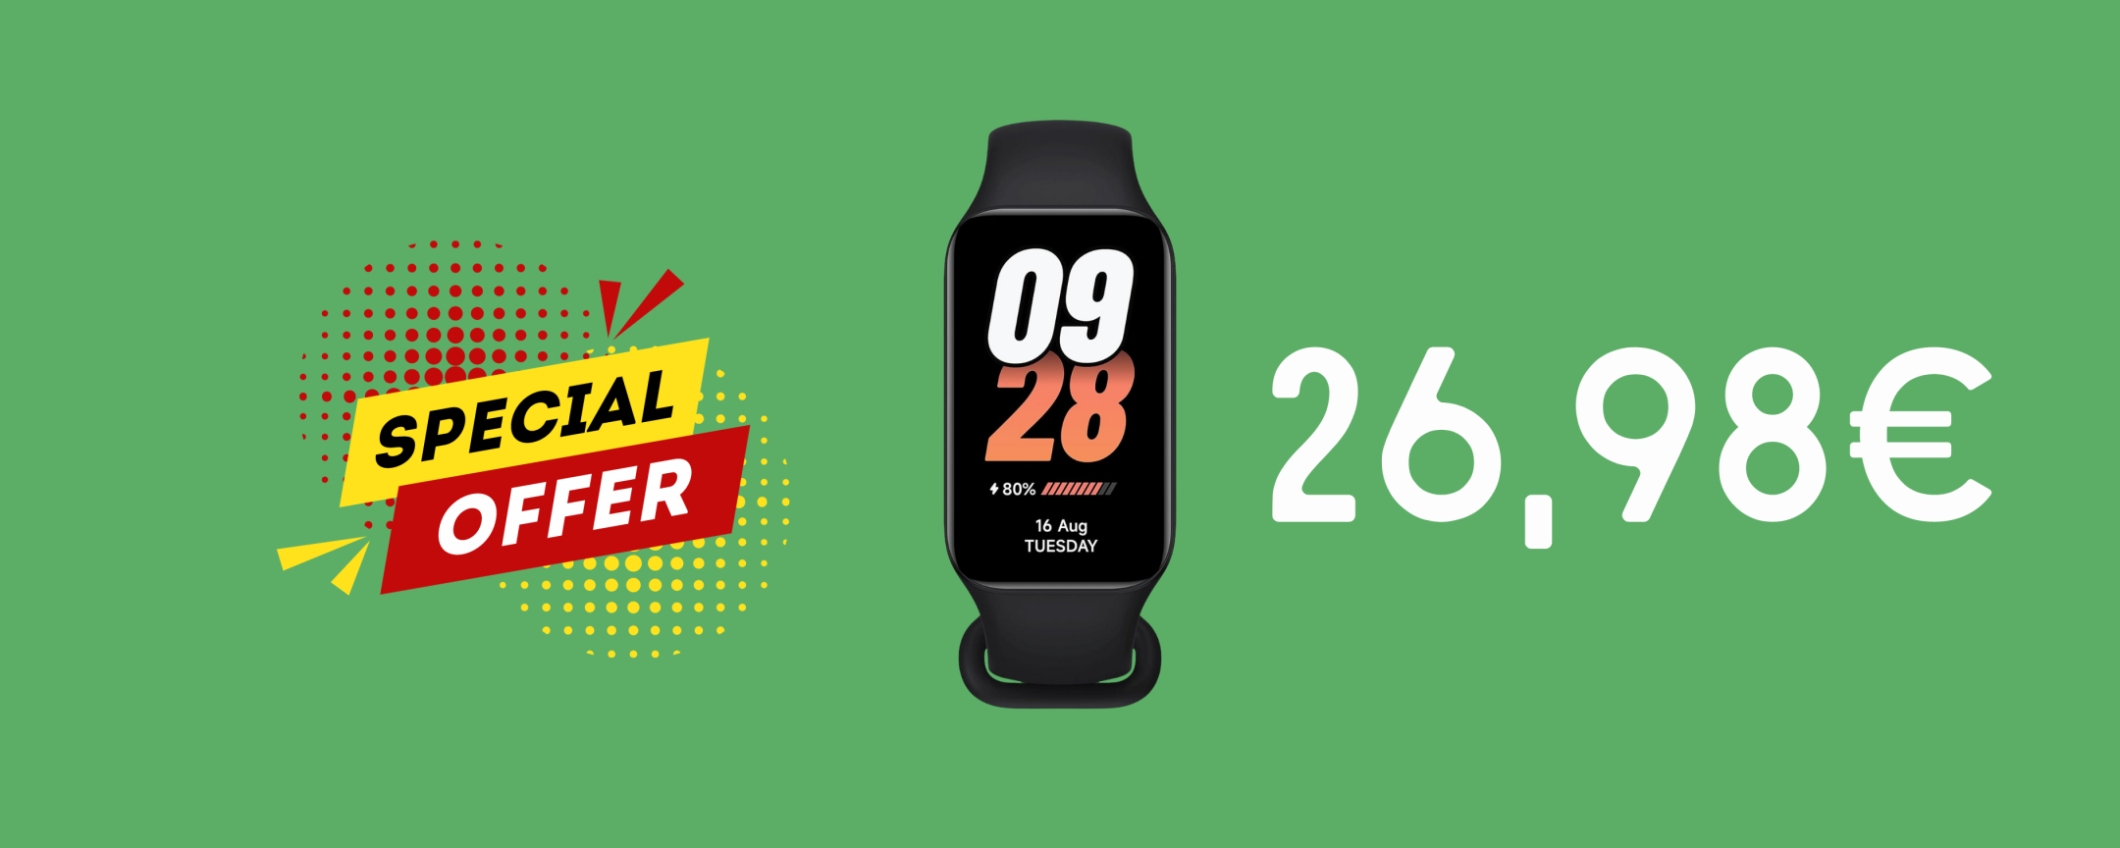 Xiaomi Smart Band 8 Active in sconto a SOLI 26,90€ è BEST-BUY